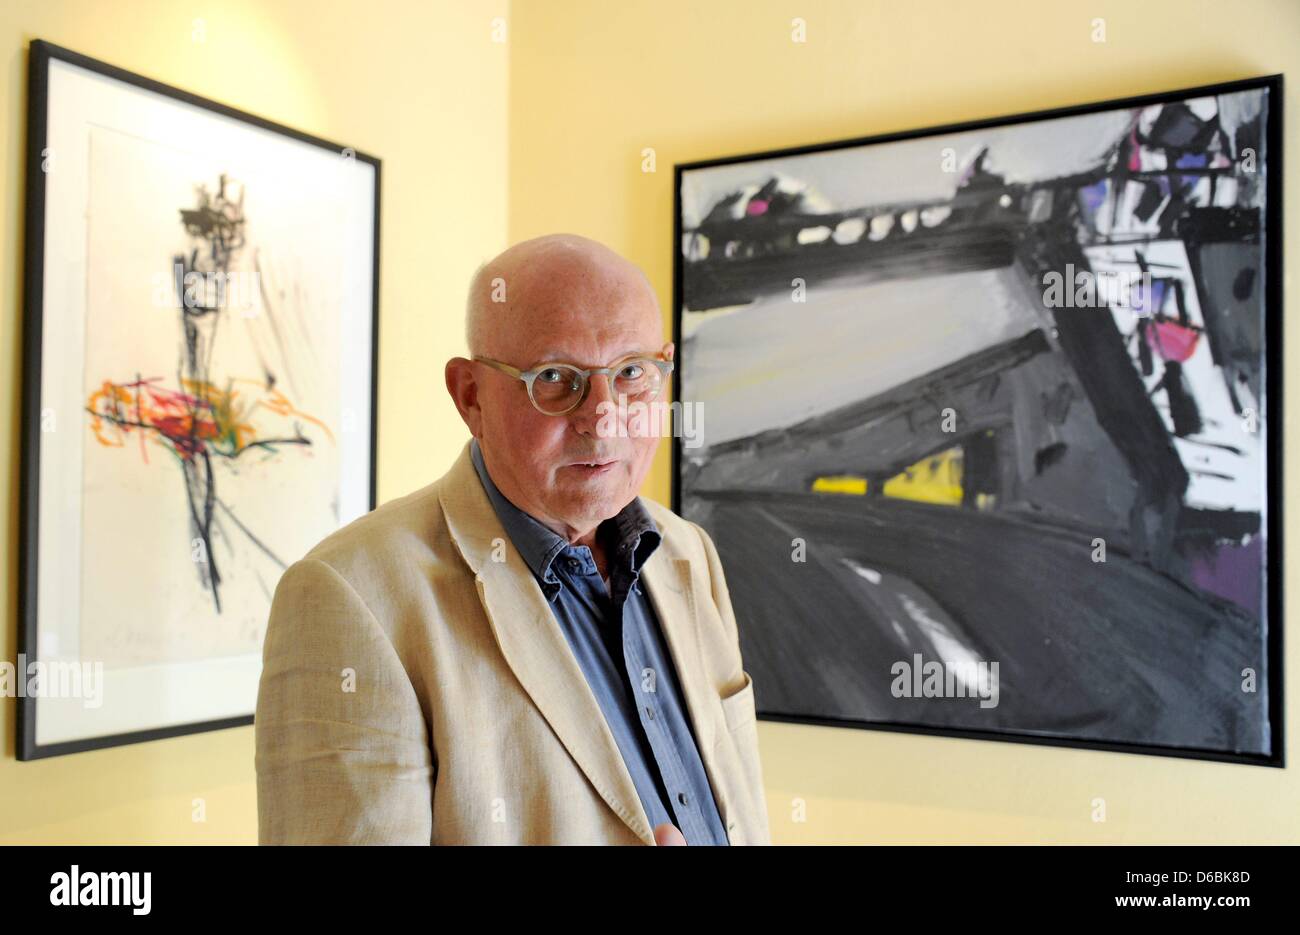 Physics professor Klaus Eberhard stands front of the paintings 'Orpheus I' (1996) by Hartwig Ebersbach and 'Fussgaengerbruecke verregnet' ('Rainy Pedestrian Bridge') (1992)  in his 'Galerie Hotel Leipziger Hof' in Leipzig, Germany, 23 August 2012. The around 450 artworks belong to Klaus Eberhard from Munich, who has the largest private collection of paintings from the Leipzig Schoo Stock Photo